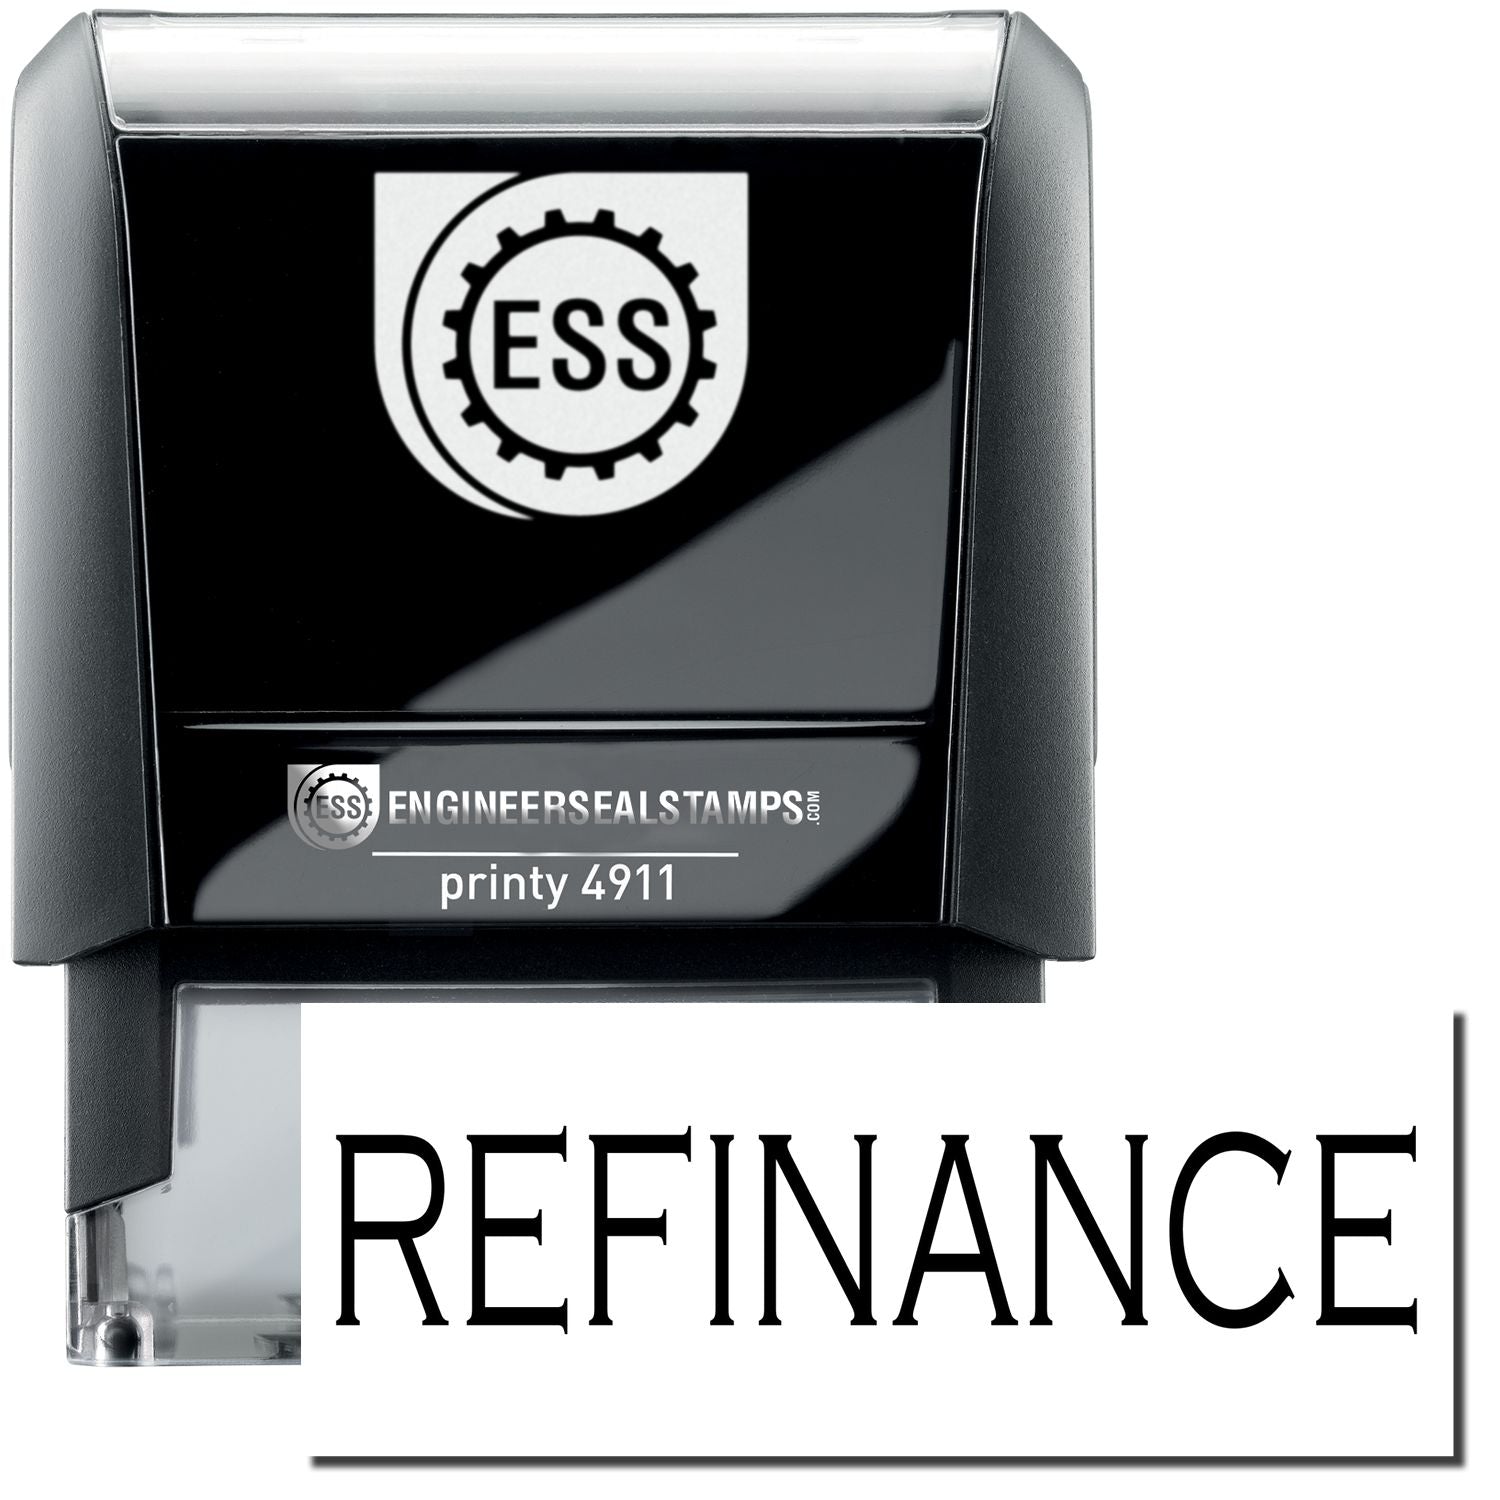 A self-inking stamp with a stamped image showing how the text "REFINANCE" is displayed after stamping.